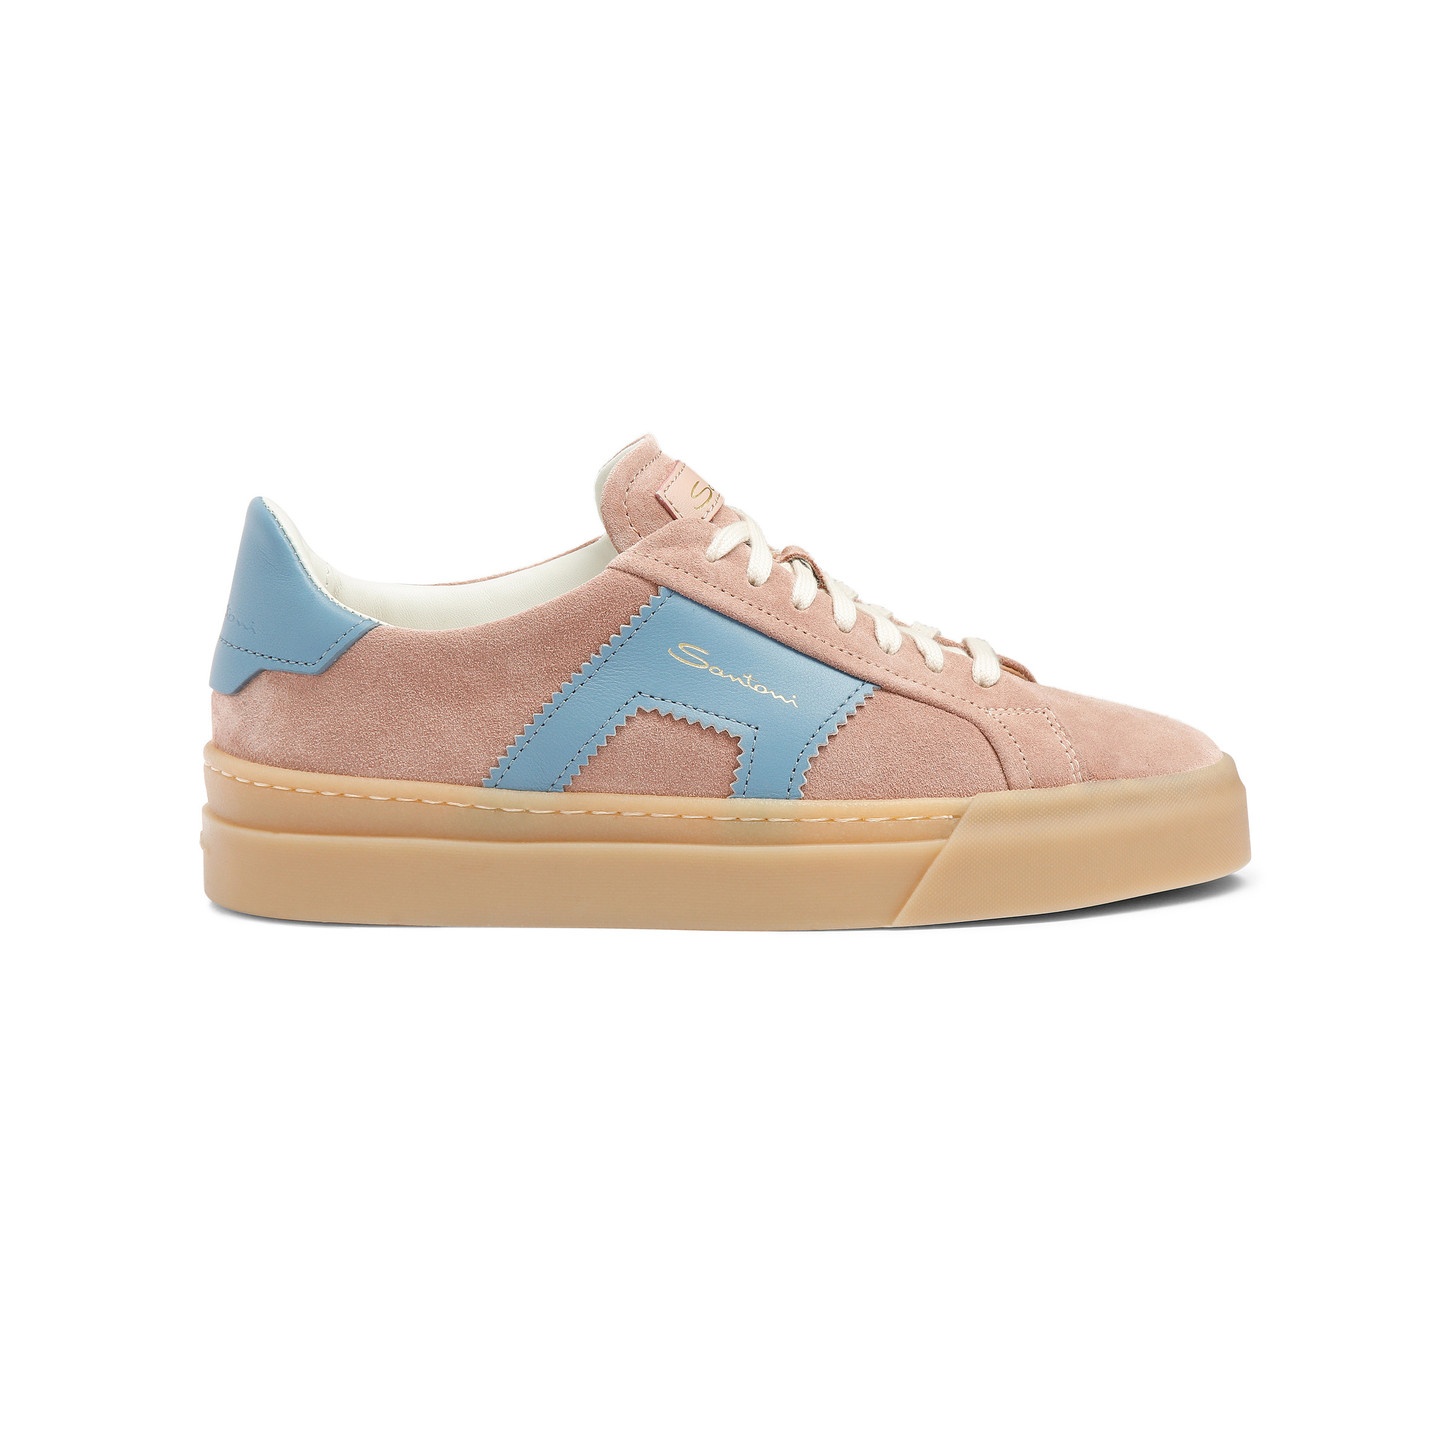 Women's pink and light blue suede and leather double buckle sneaker - 1